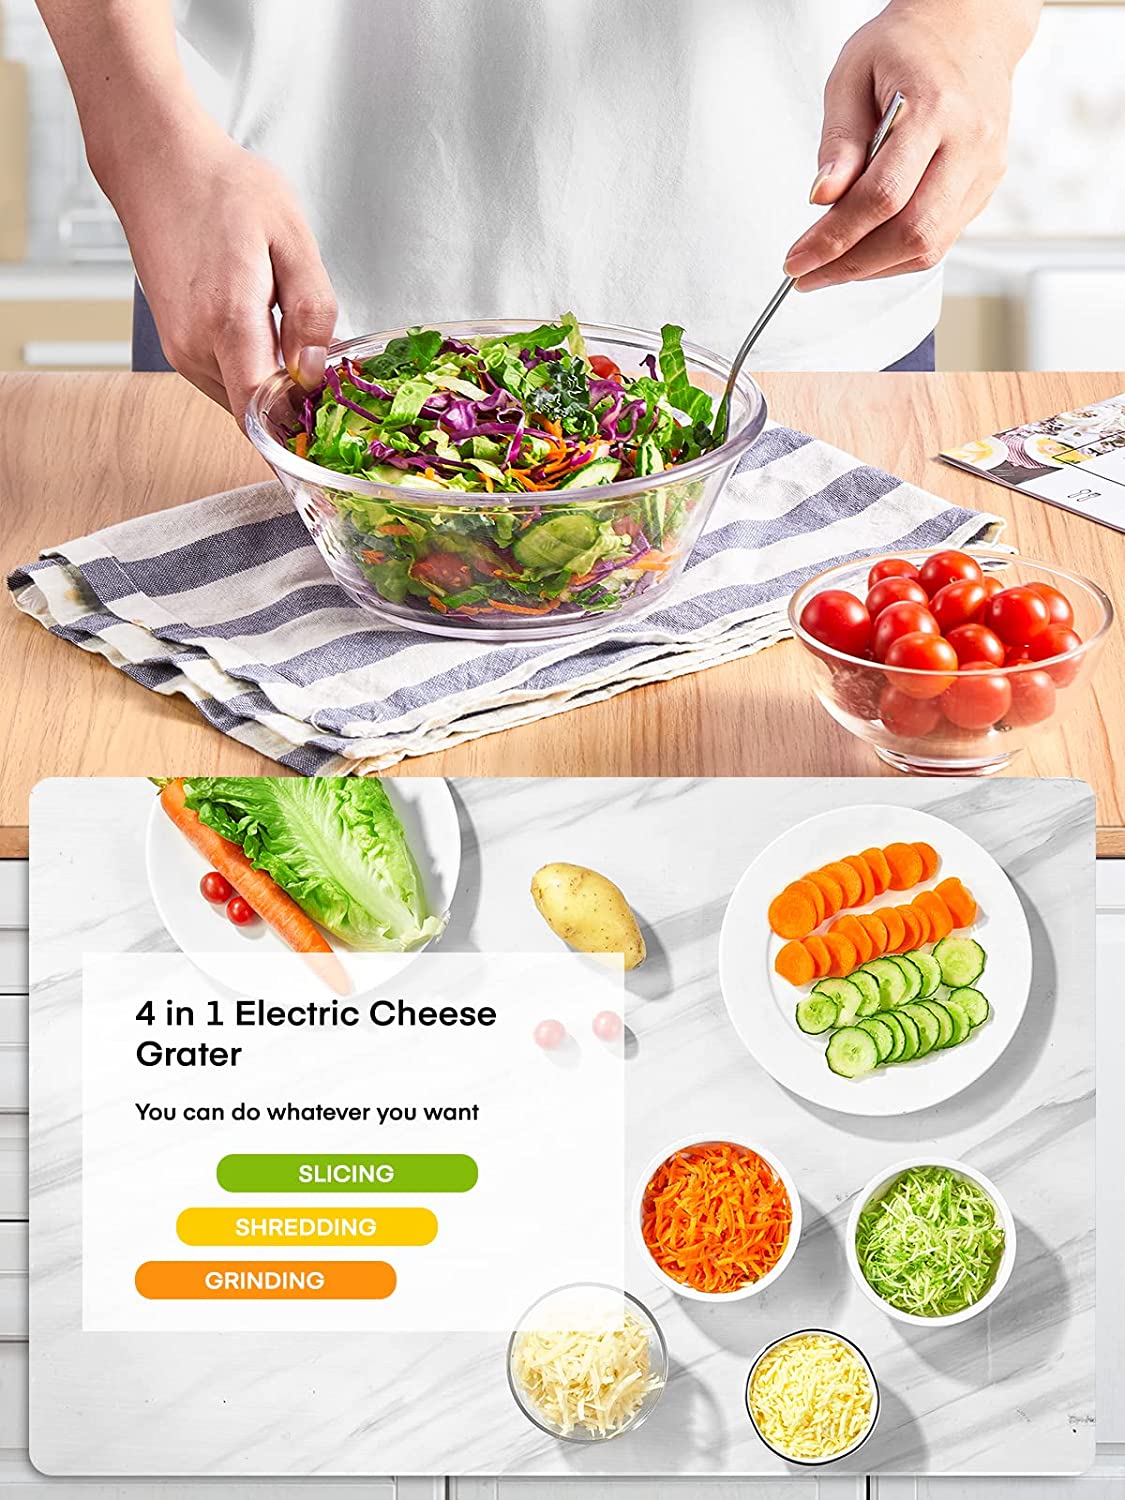 4 in 1 electric cheese grater, FOHERE Electric Cheese Grater Shredder, Electric Vegetable Slicer Professional Salad Shooter for Home Kitchen Use, One-Touch Easy Control, Salad Maker Machine for Vegetables, Cheeses, BPA-Free, Red